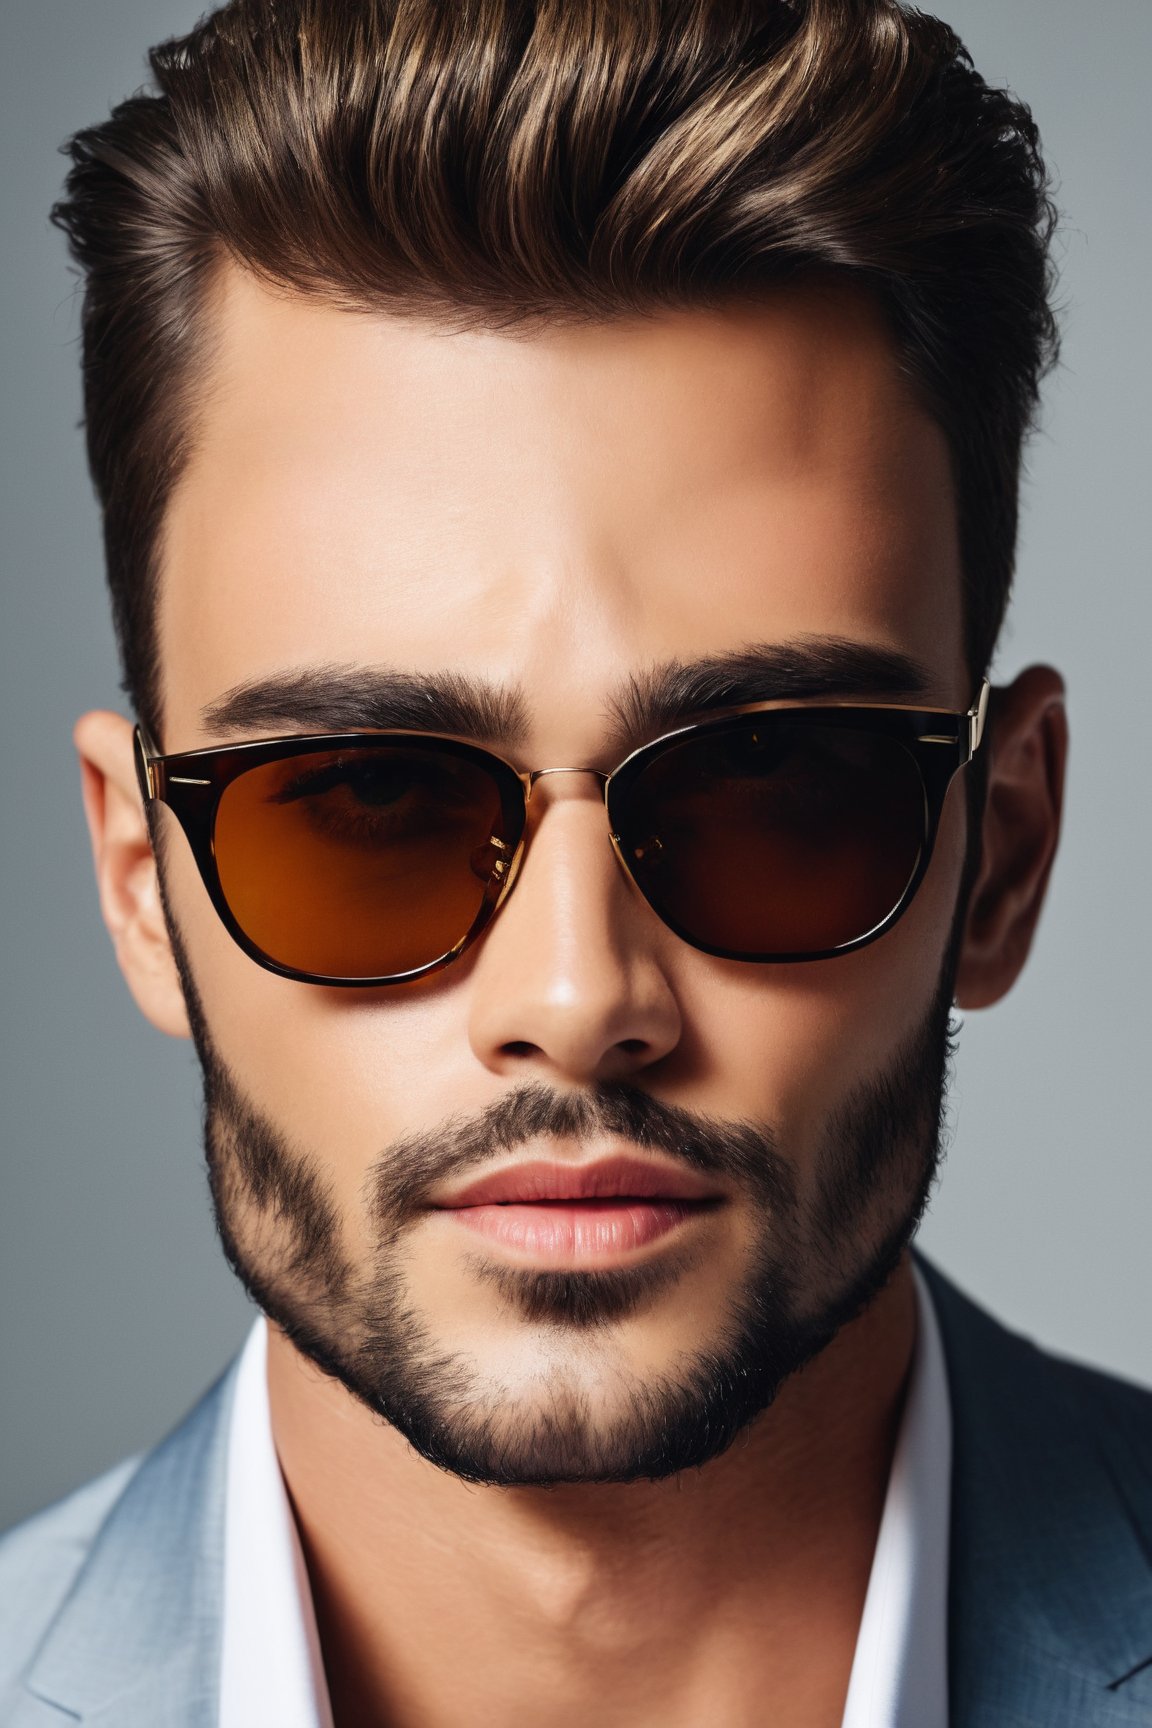 (realistic:1.2),visually stunning portrait,man with a stylish and confident expression,wearing trendy sunglasses,detailed facial features,meticulously styled hair,impeccable grooming,striking composition,captivating lighting,subtle shadows and highlights,vivid colors.